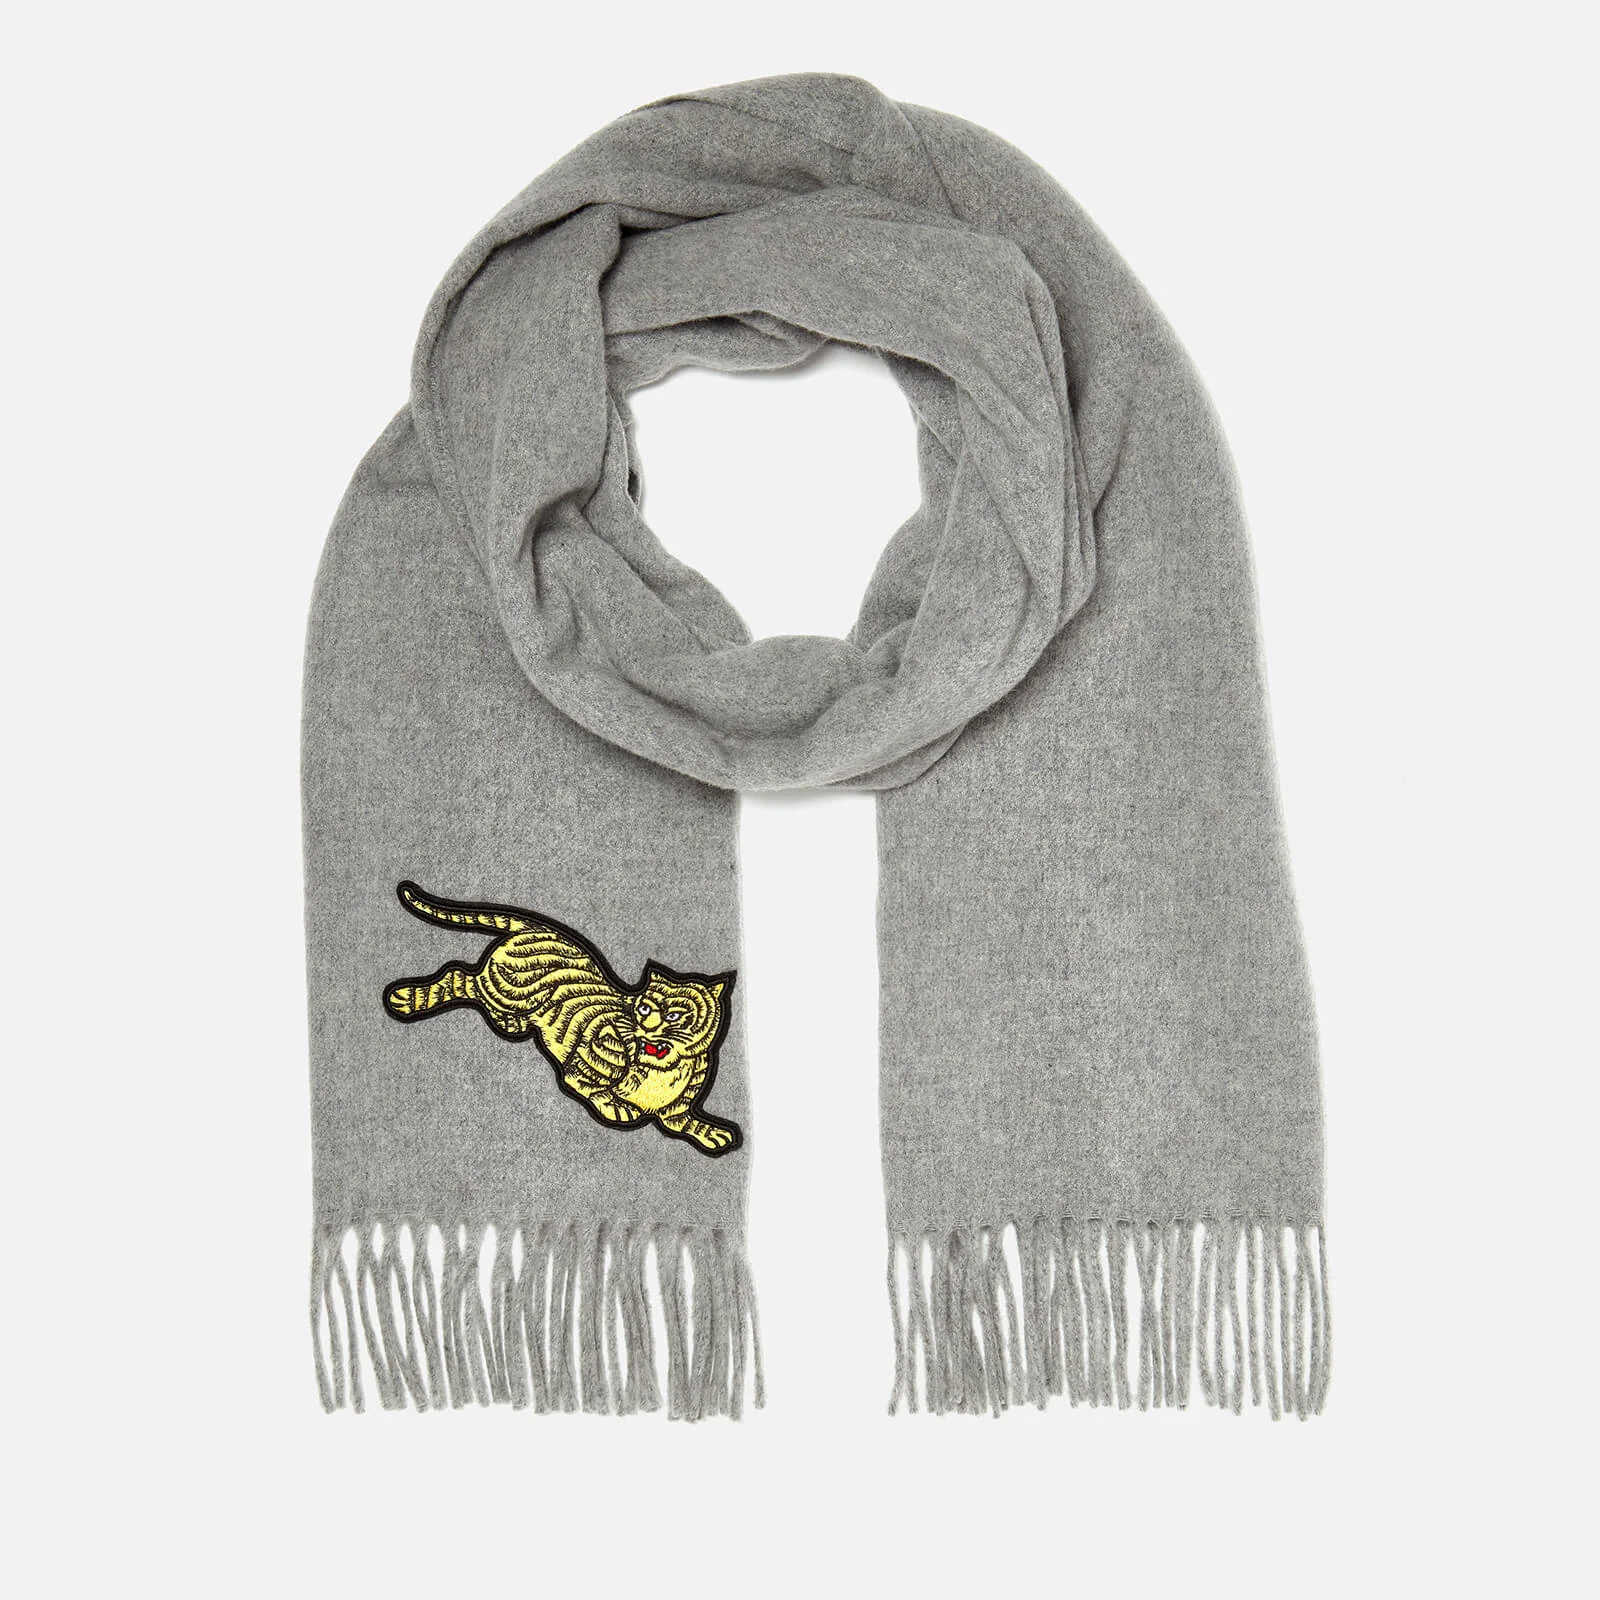 KENZO Women's Jumping Tiger Stole Scarf - Pale Grey Image 1